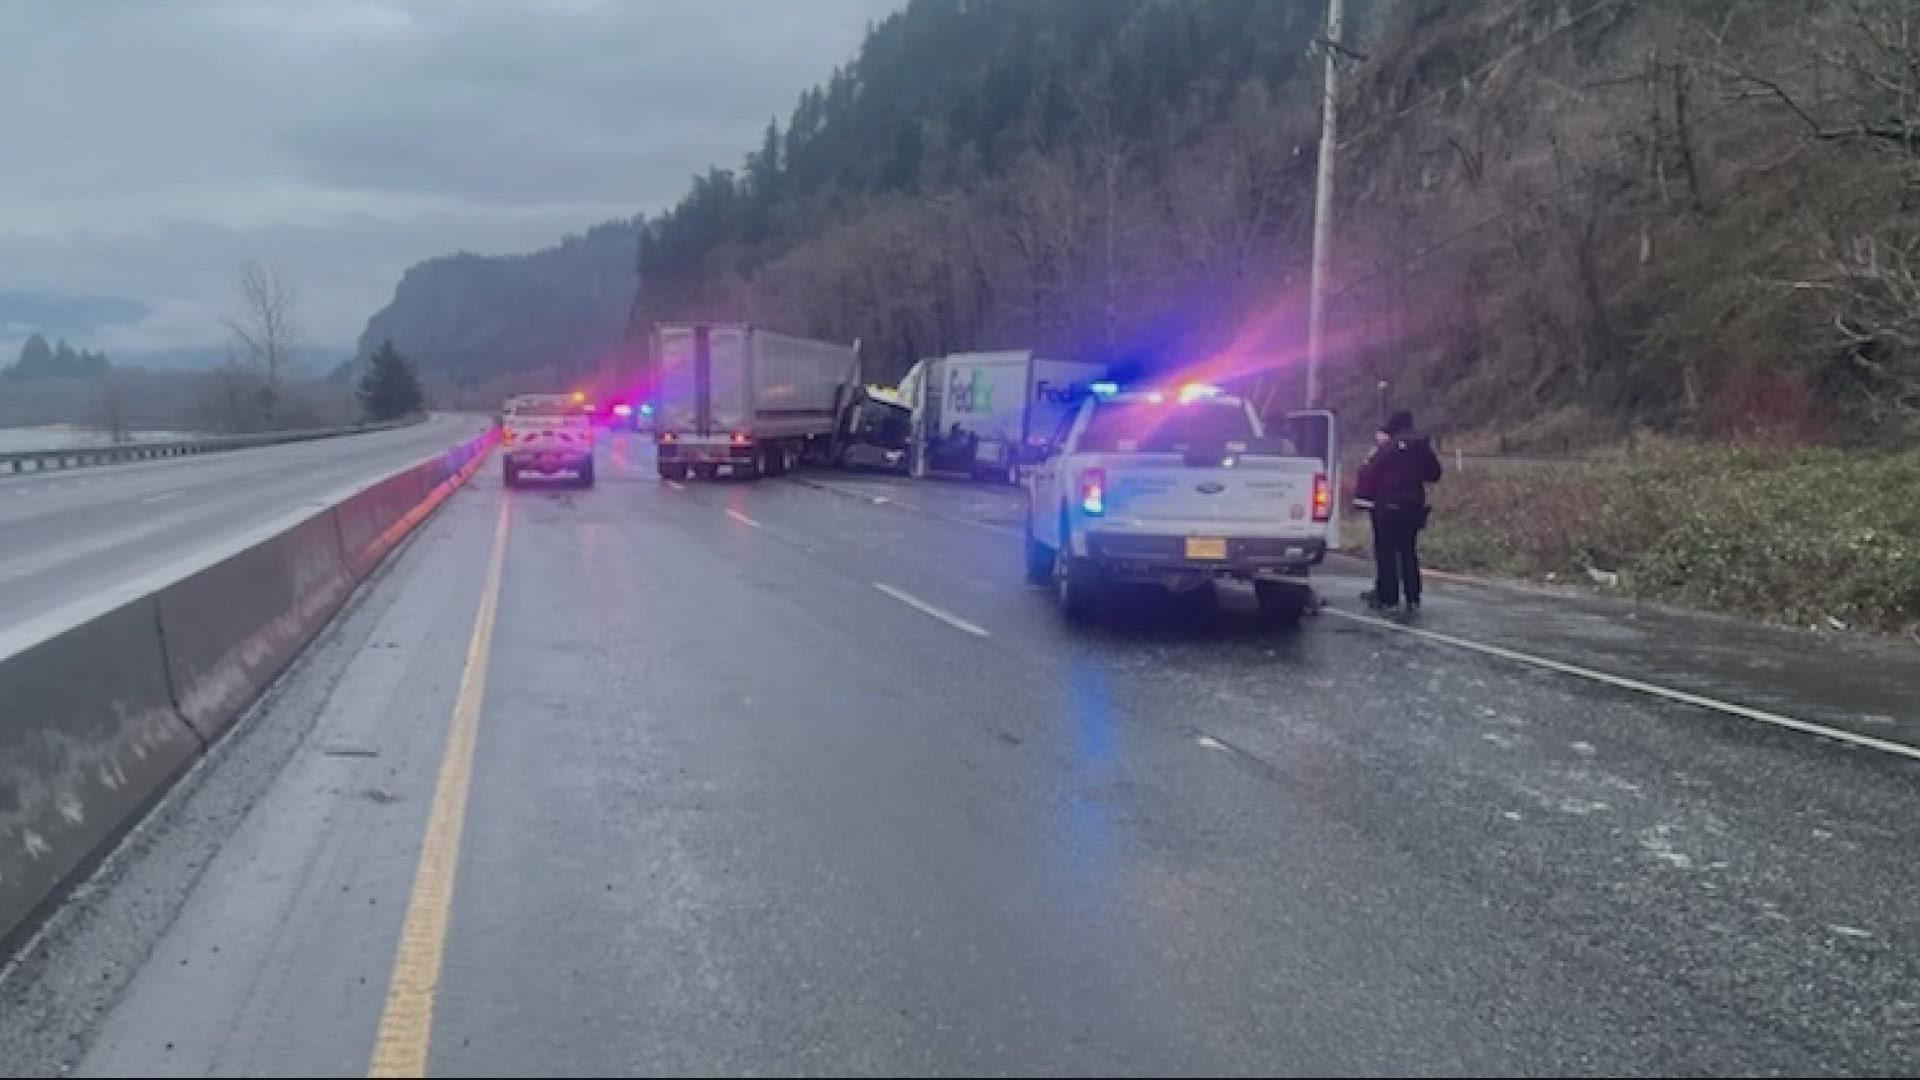 Icy road conditions: Interstate 84 reopens after fatal crash